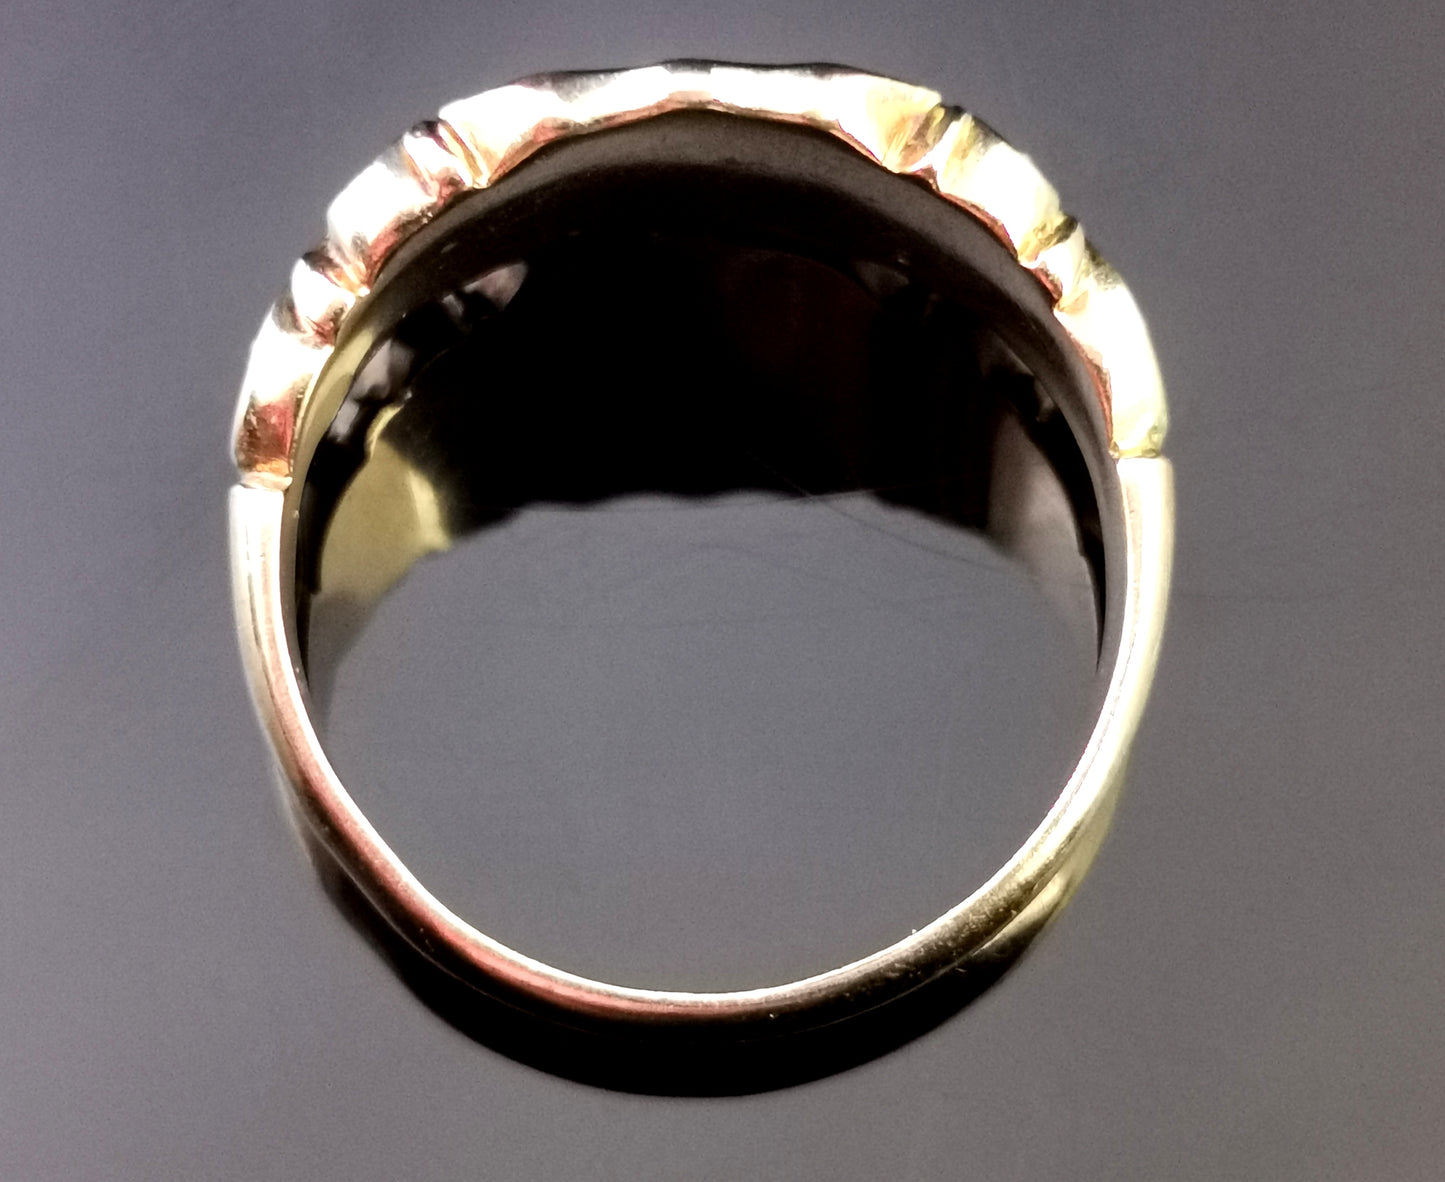 Antique Signet ring, 9ct Rose gold, shield shaped, heavy